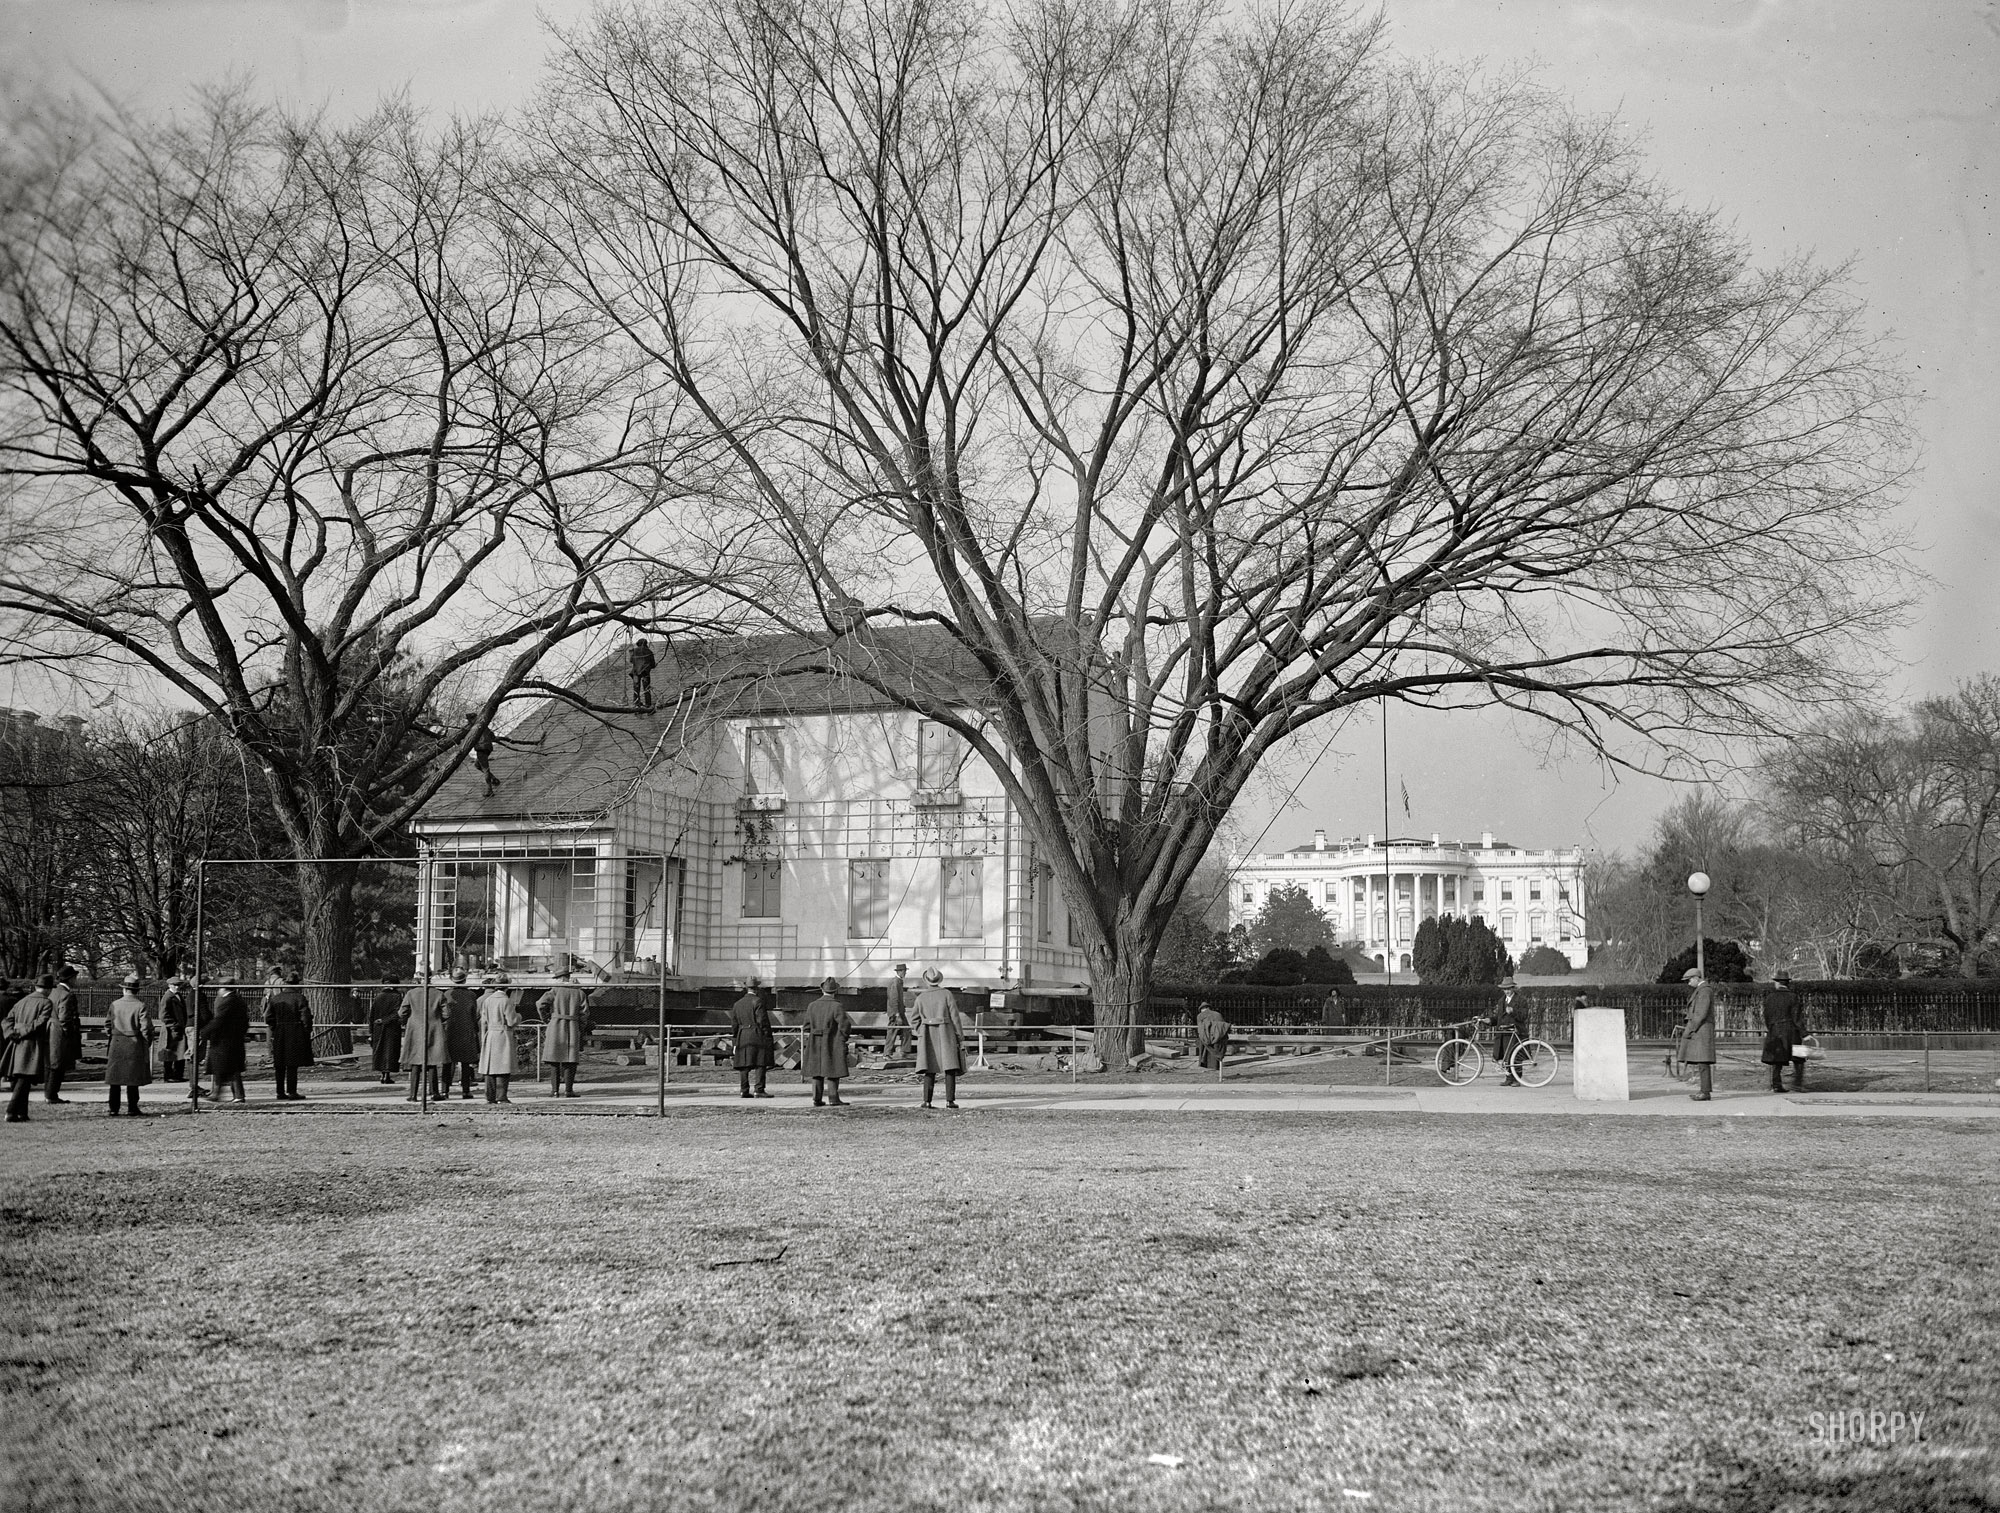 February 2, 1924. "Home Sweet Home being moved to its permanent location, passing the south grounds of the White House. The building is to be used as a headquarters for the Girl Scouts of America." After eight months in Sherman Square the building, a "model American home" put up by the National Federation of Women's Clubs, was moved ("by hefty mules," said the Washington Post) to new digs at 18th Street and New York Avenue. The "snug little house" (weight 150 tons) was a replica of the Long Island residence of lyricist John Howard Payne, who 100 years earlier had written "Home Sweet Home." View full size.